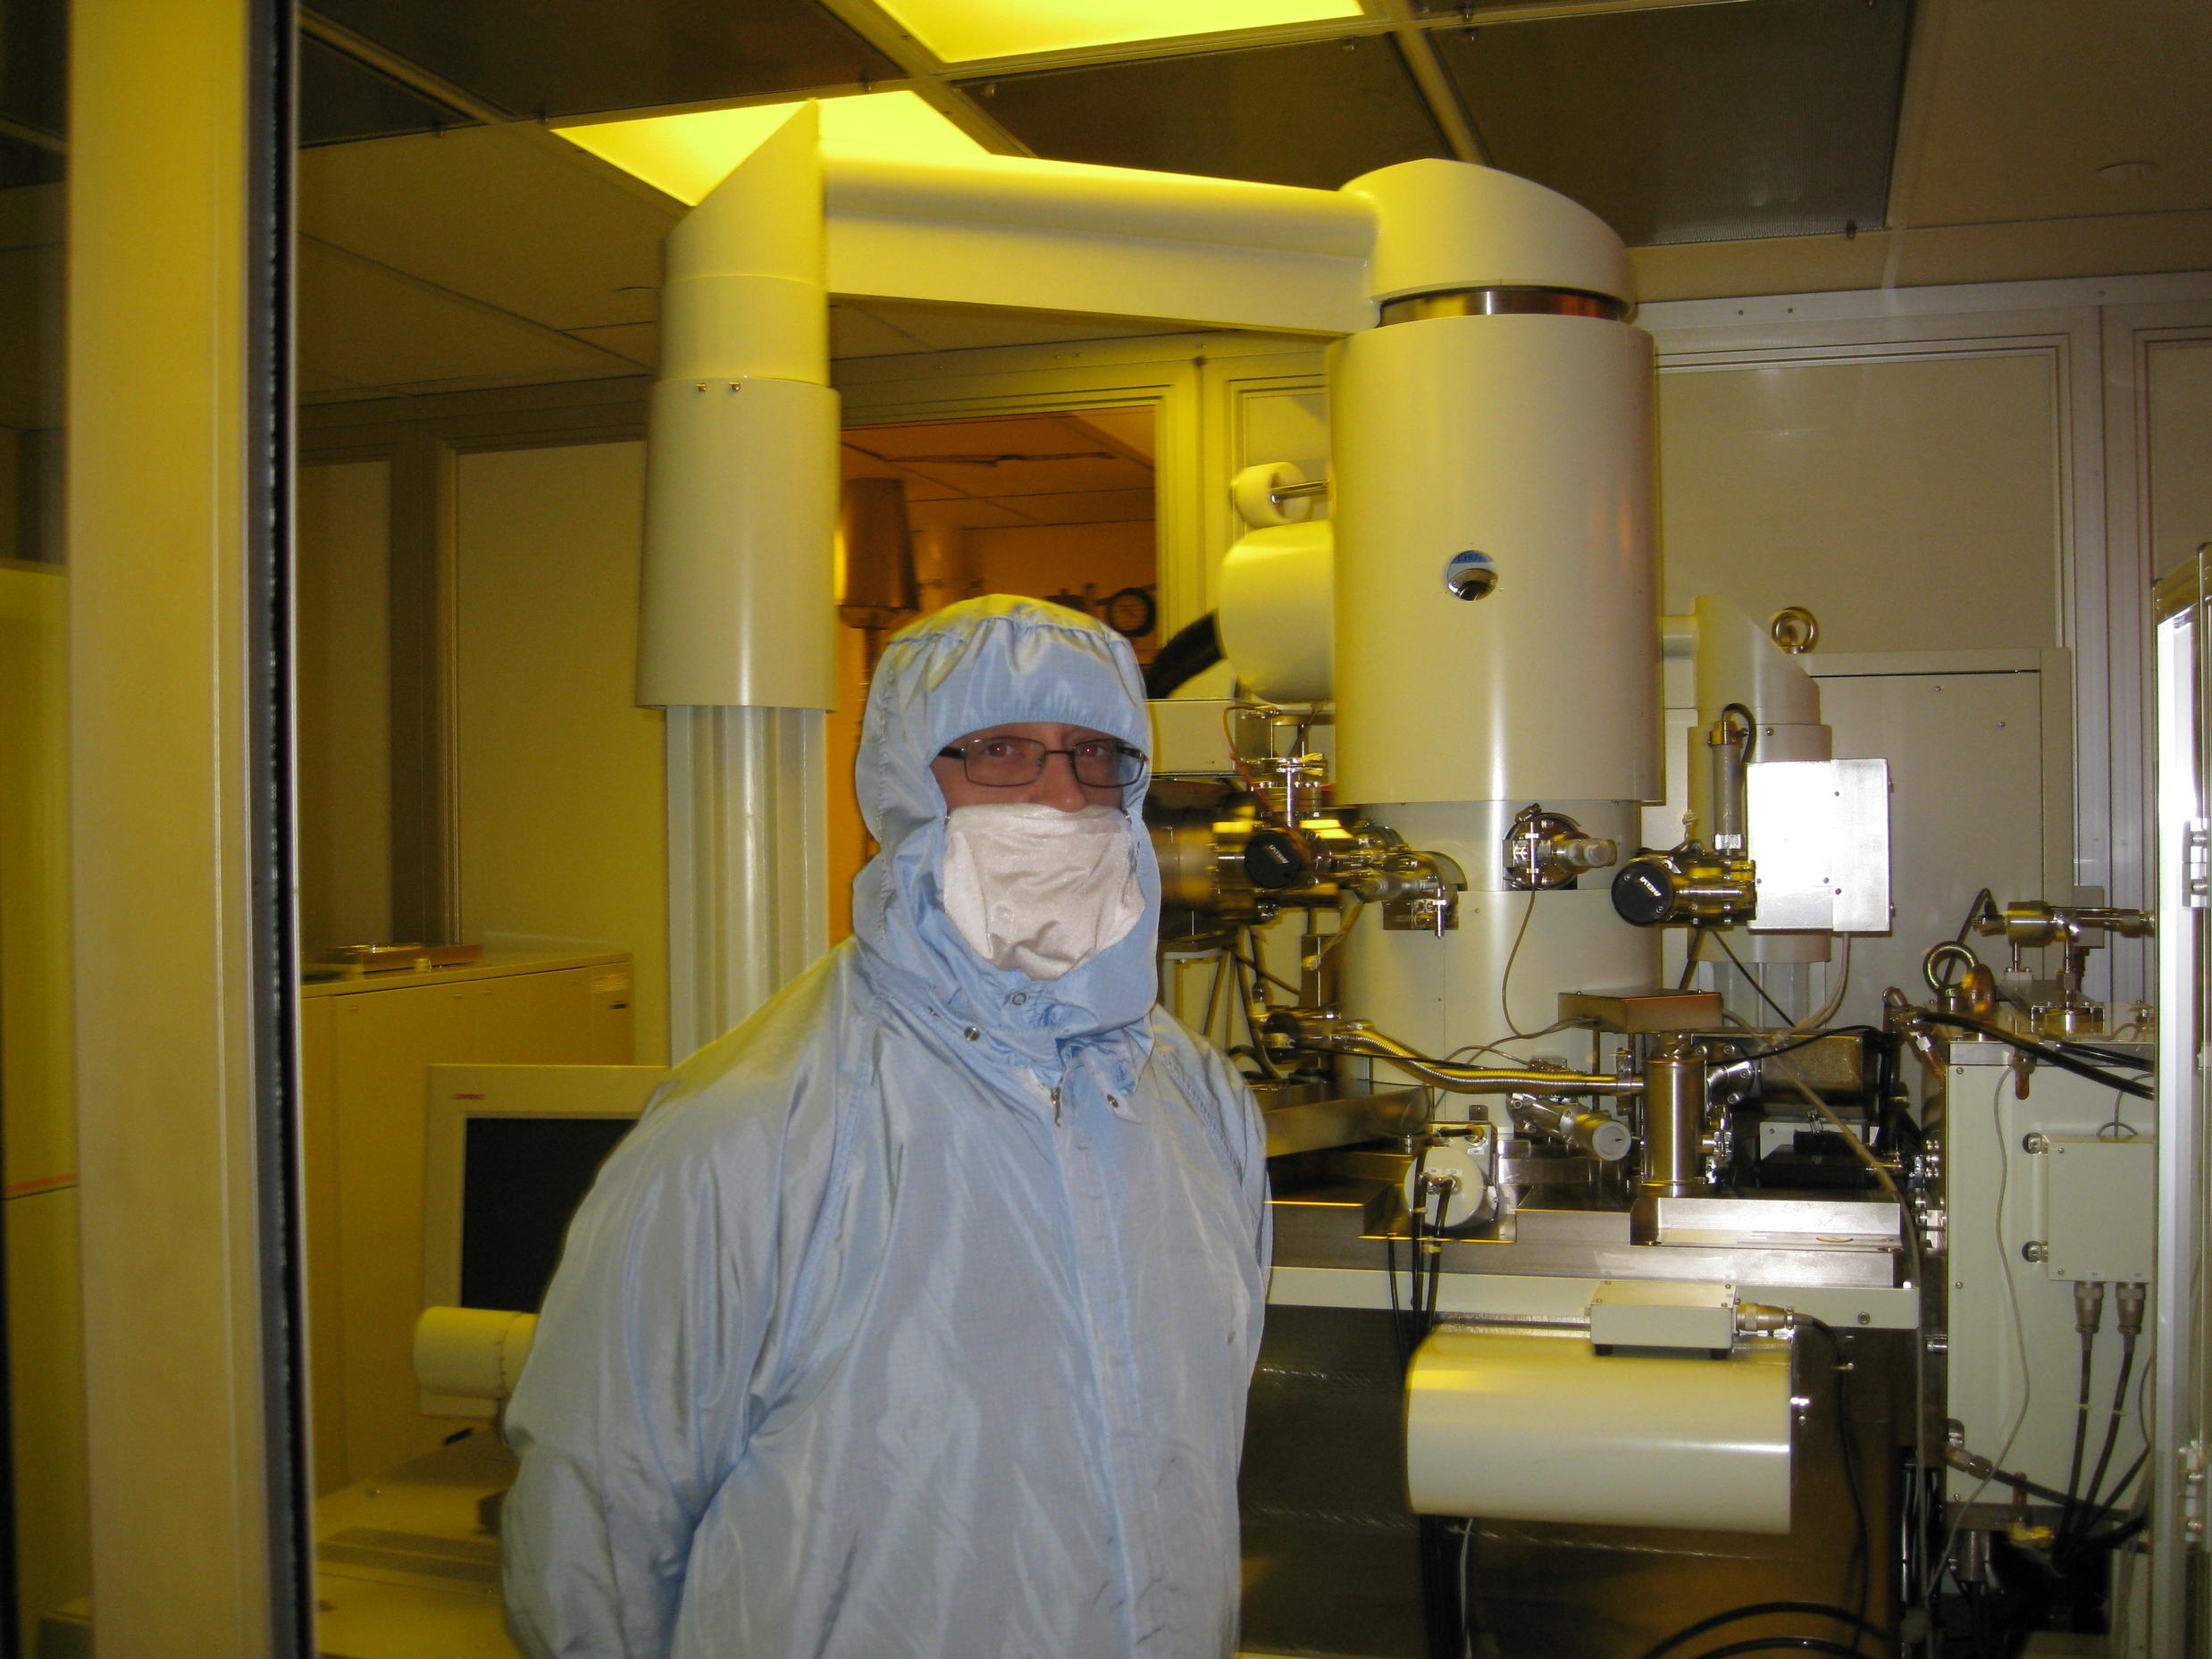 Richard Muller in front of the e-beam lithography tool that wrote over 1.3 million names on the microchip that will fly on Orion.